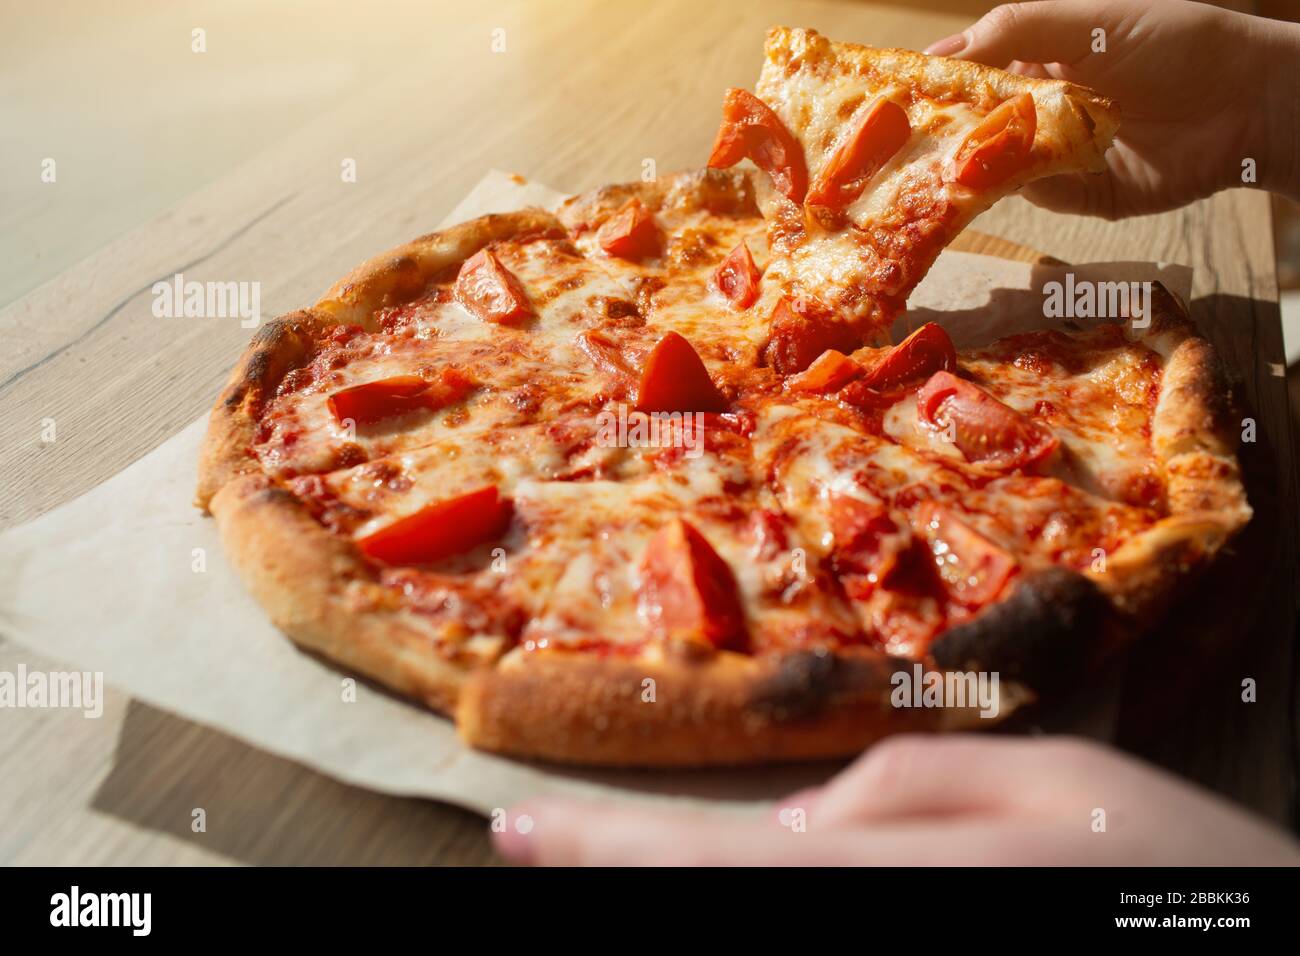 Big pizza stands on a table in a cafe close-up. Italian pizza cut on pieces. Stock Photo